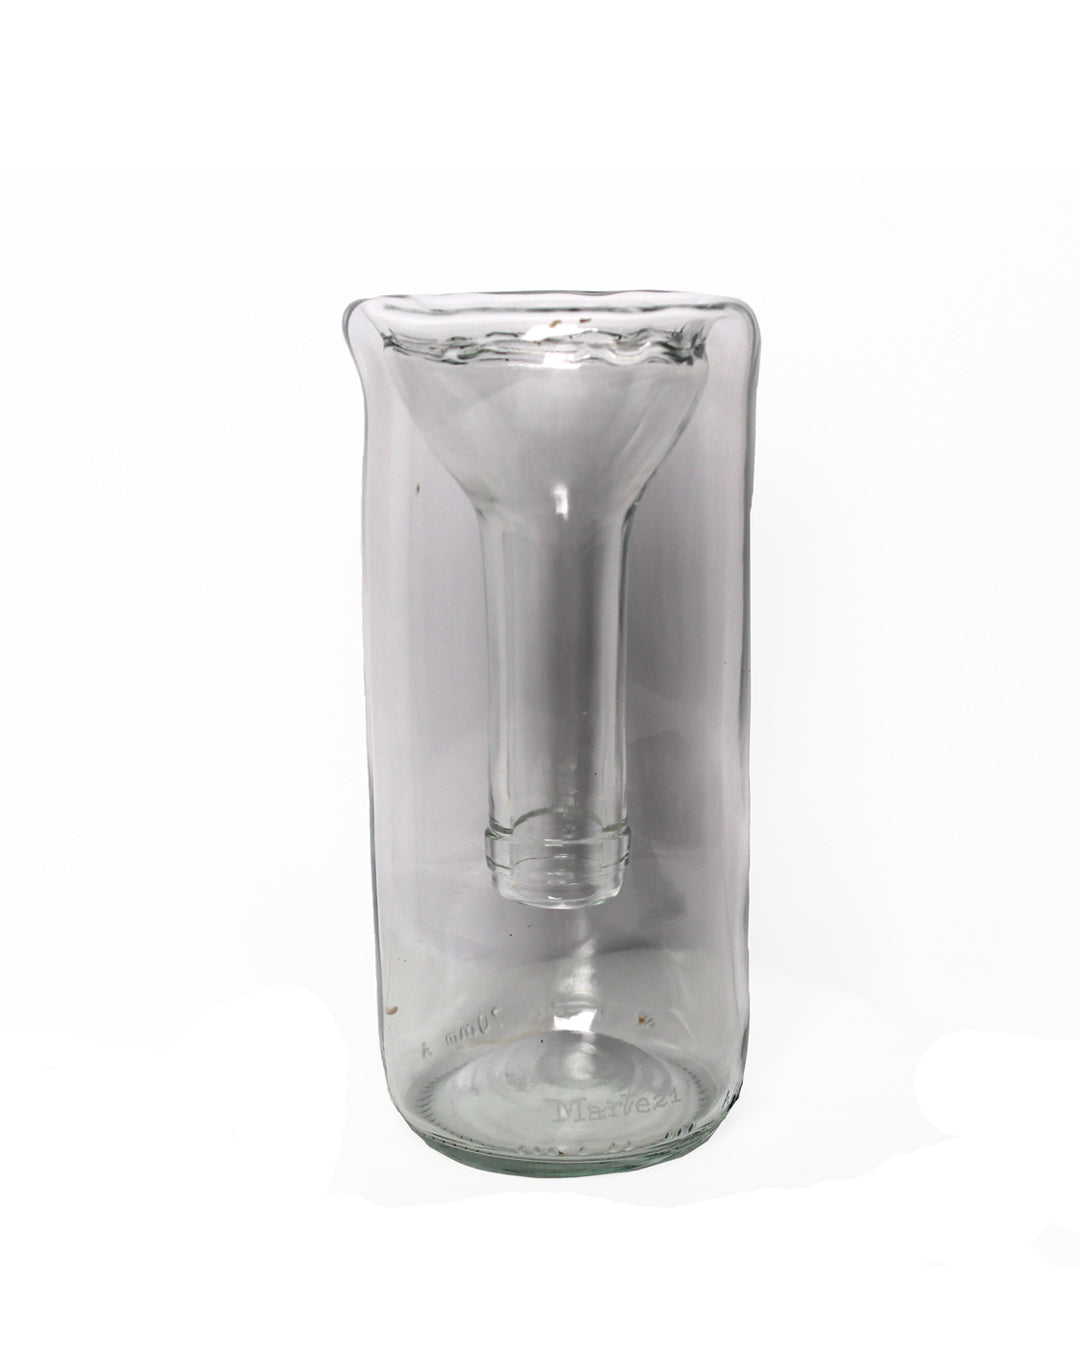 recycled glass vase- Marte 21 